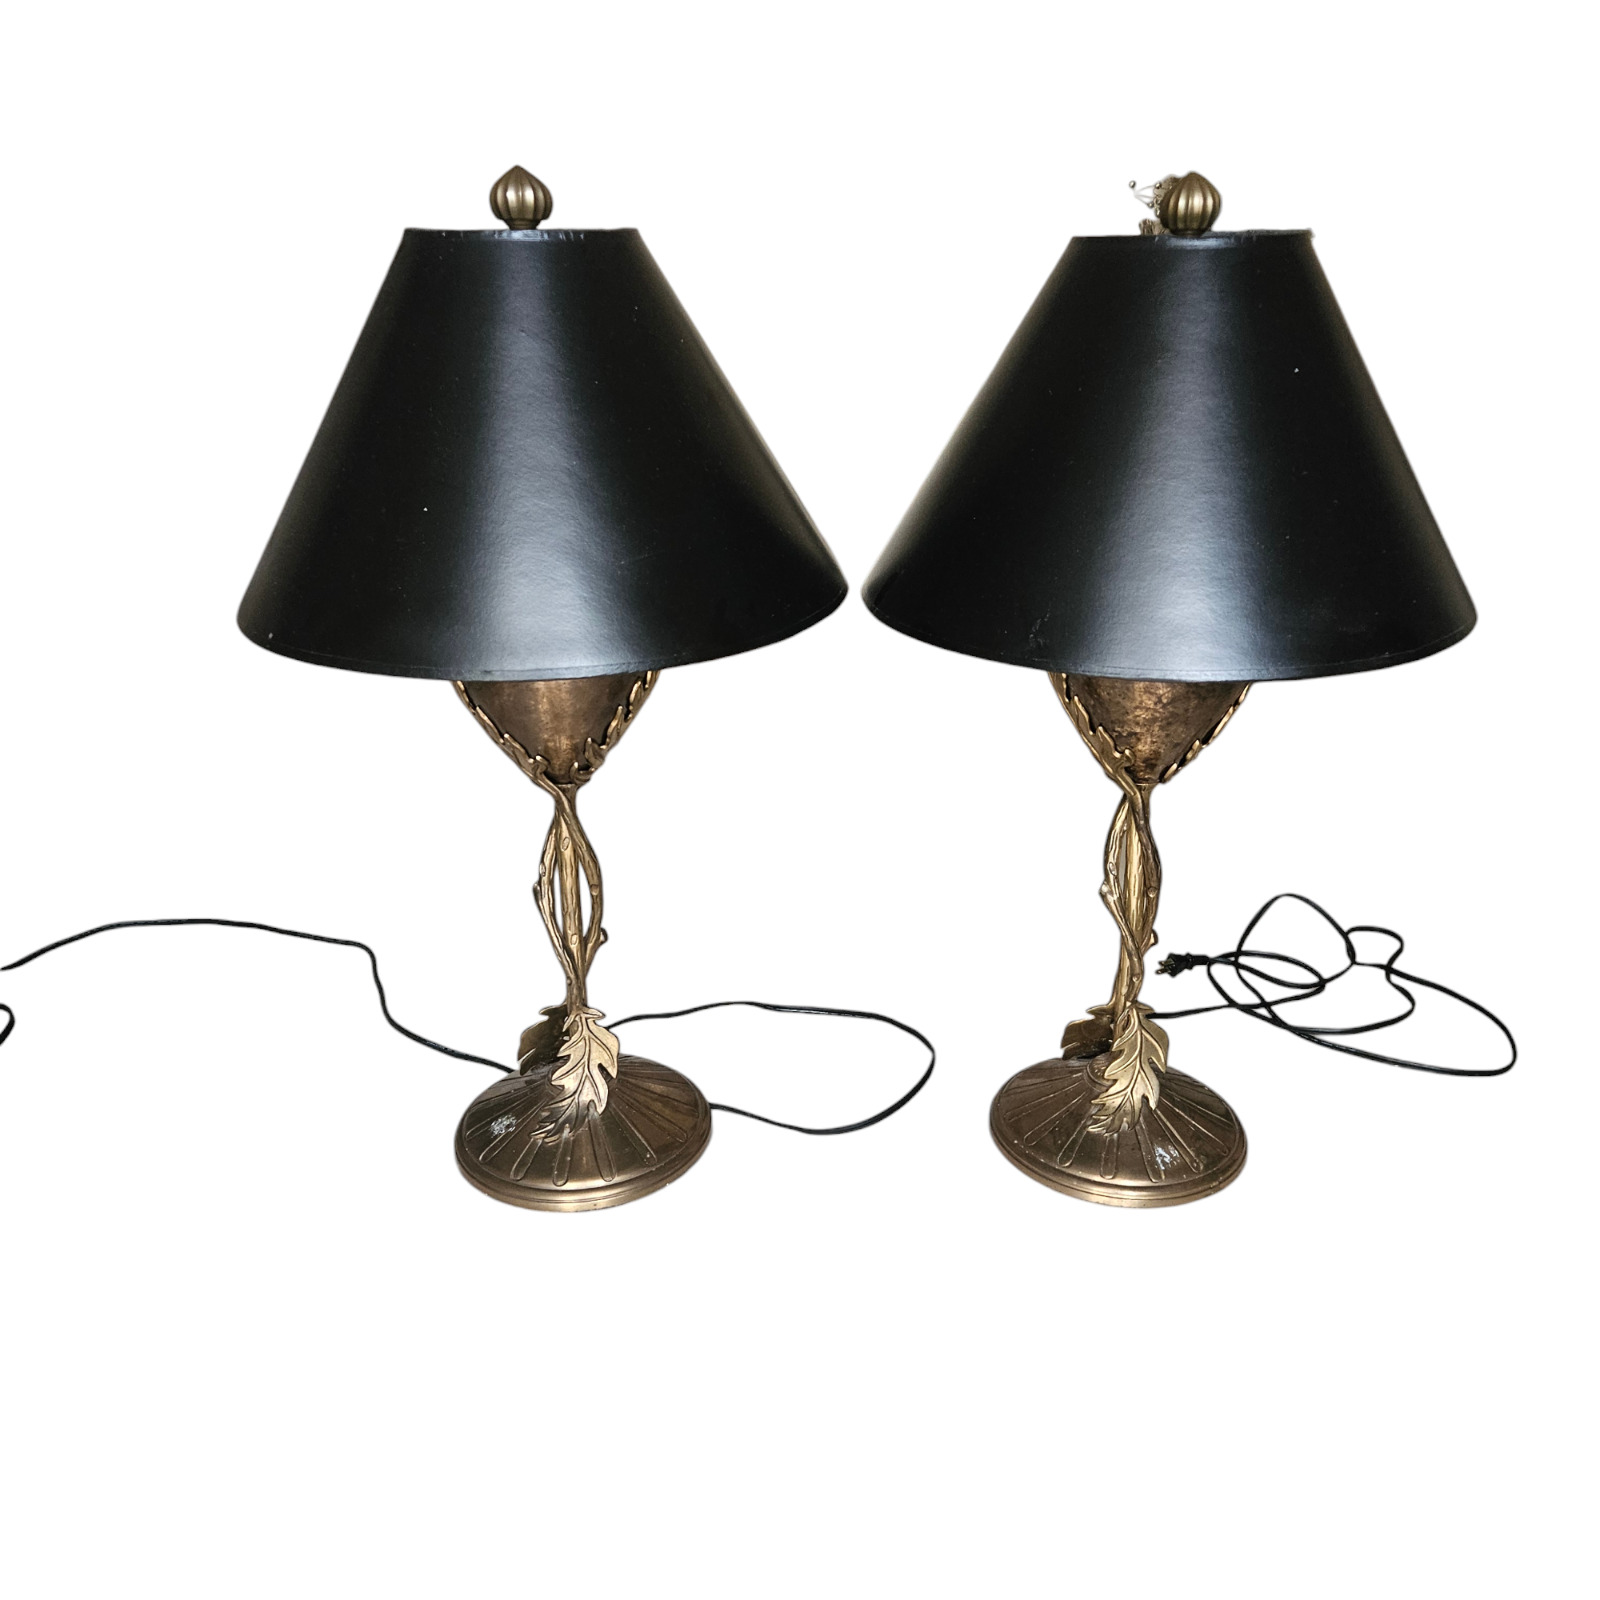 STUNNING WILDWOOD BRASS FALL N LEAVES BRASS TABLE LAMPS - A PAIR